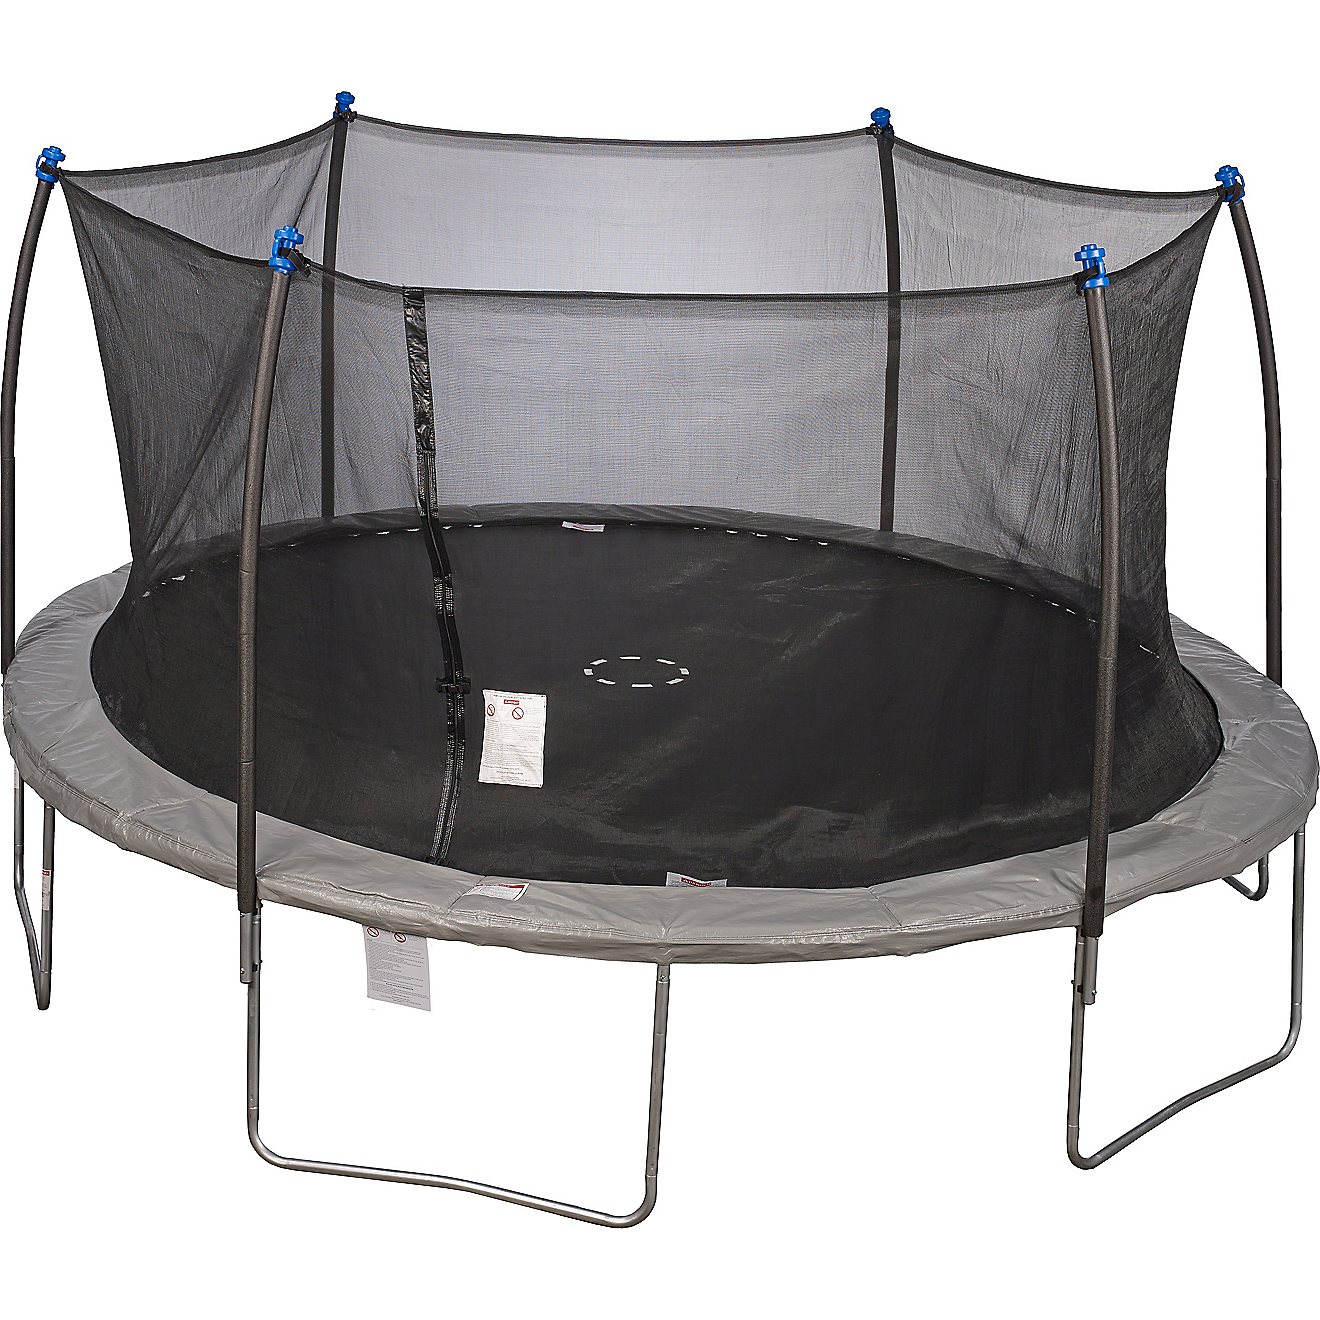 JumpZone Premium 15' x 17' Oval Trampoline with Enclosure Box 2 of 2                                                             - view number 1